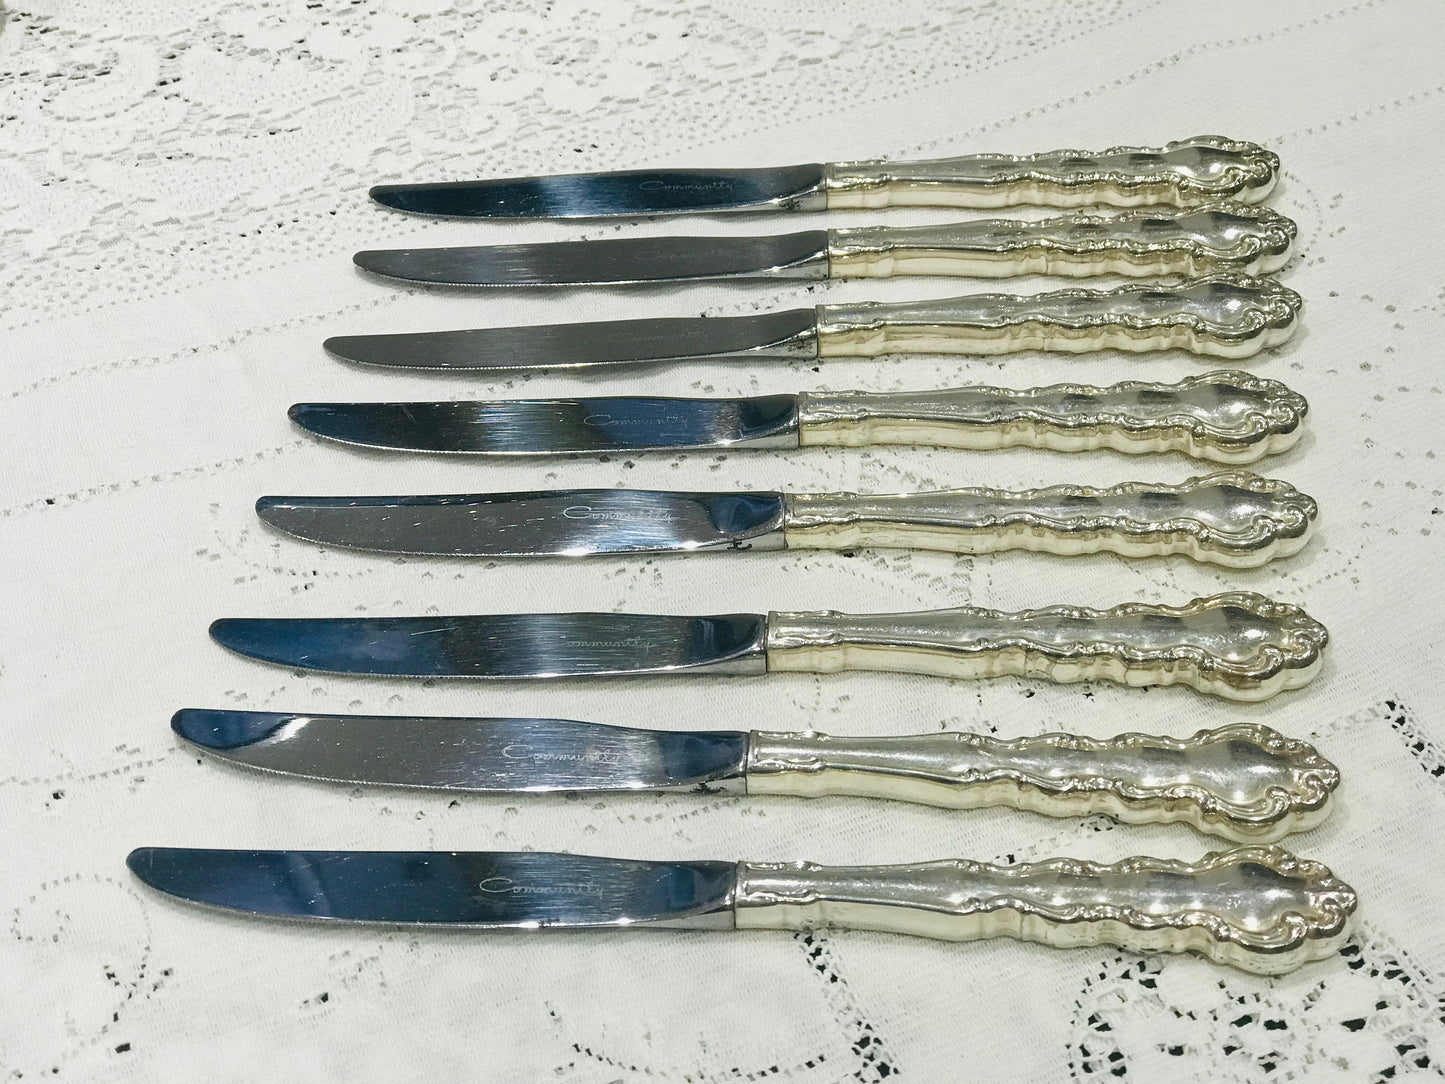 Flatware/Cutlery Dinner Knives Mansion House Oneida Silver Service Cutlery Traditional Quality Stainless Steel Silver Plate Stamped